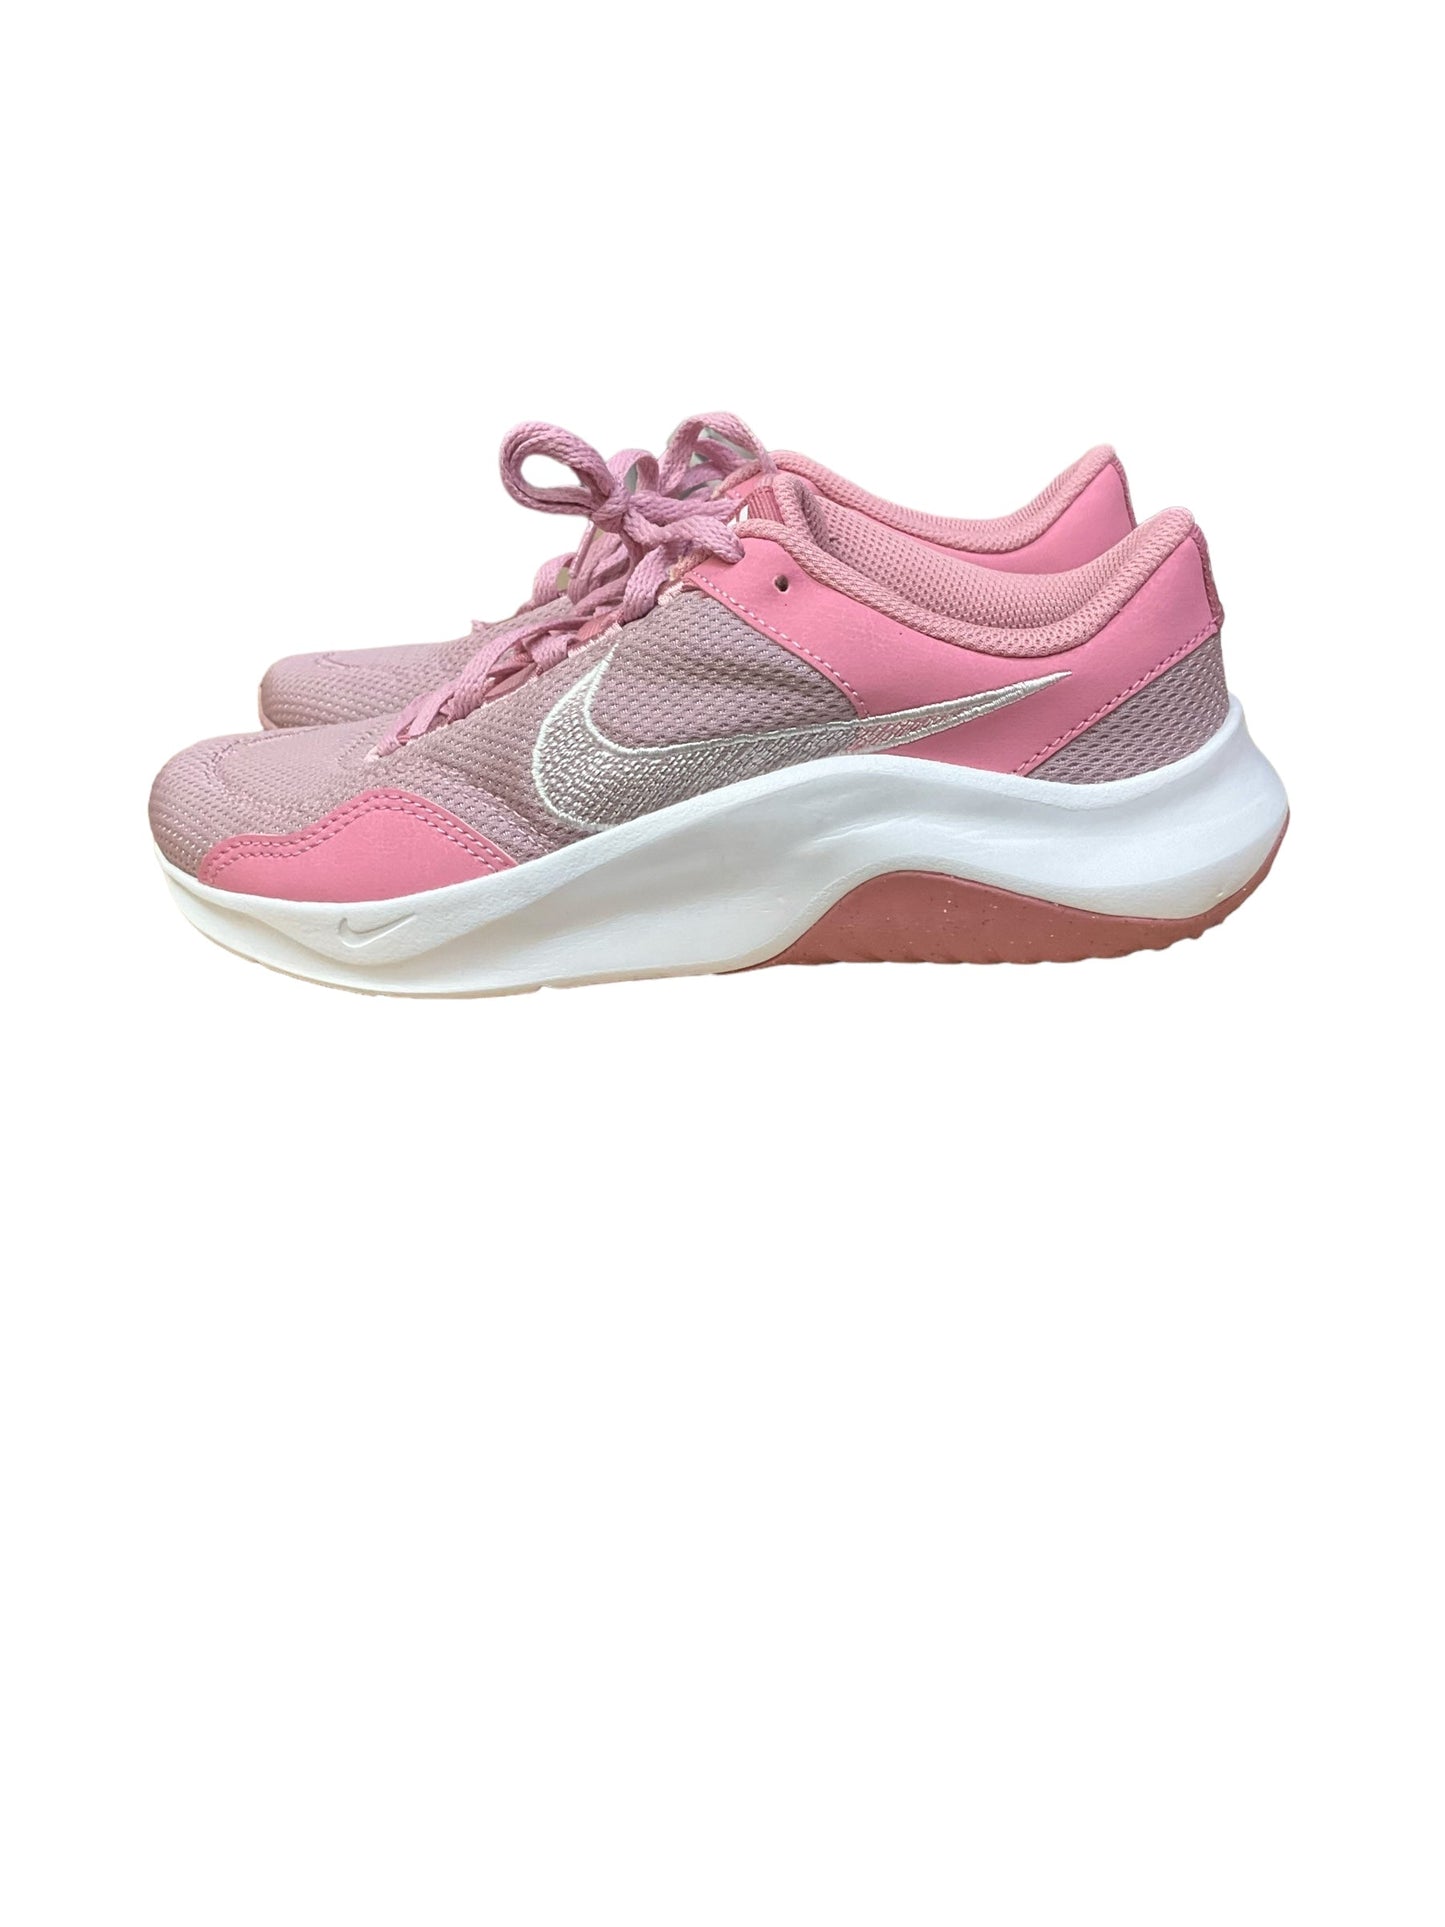 Pink Shoes Athletic Nike, Size 7.5